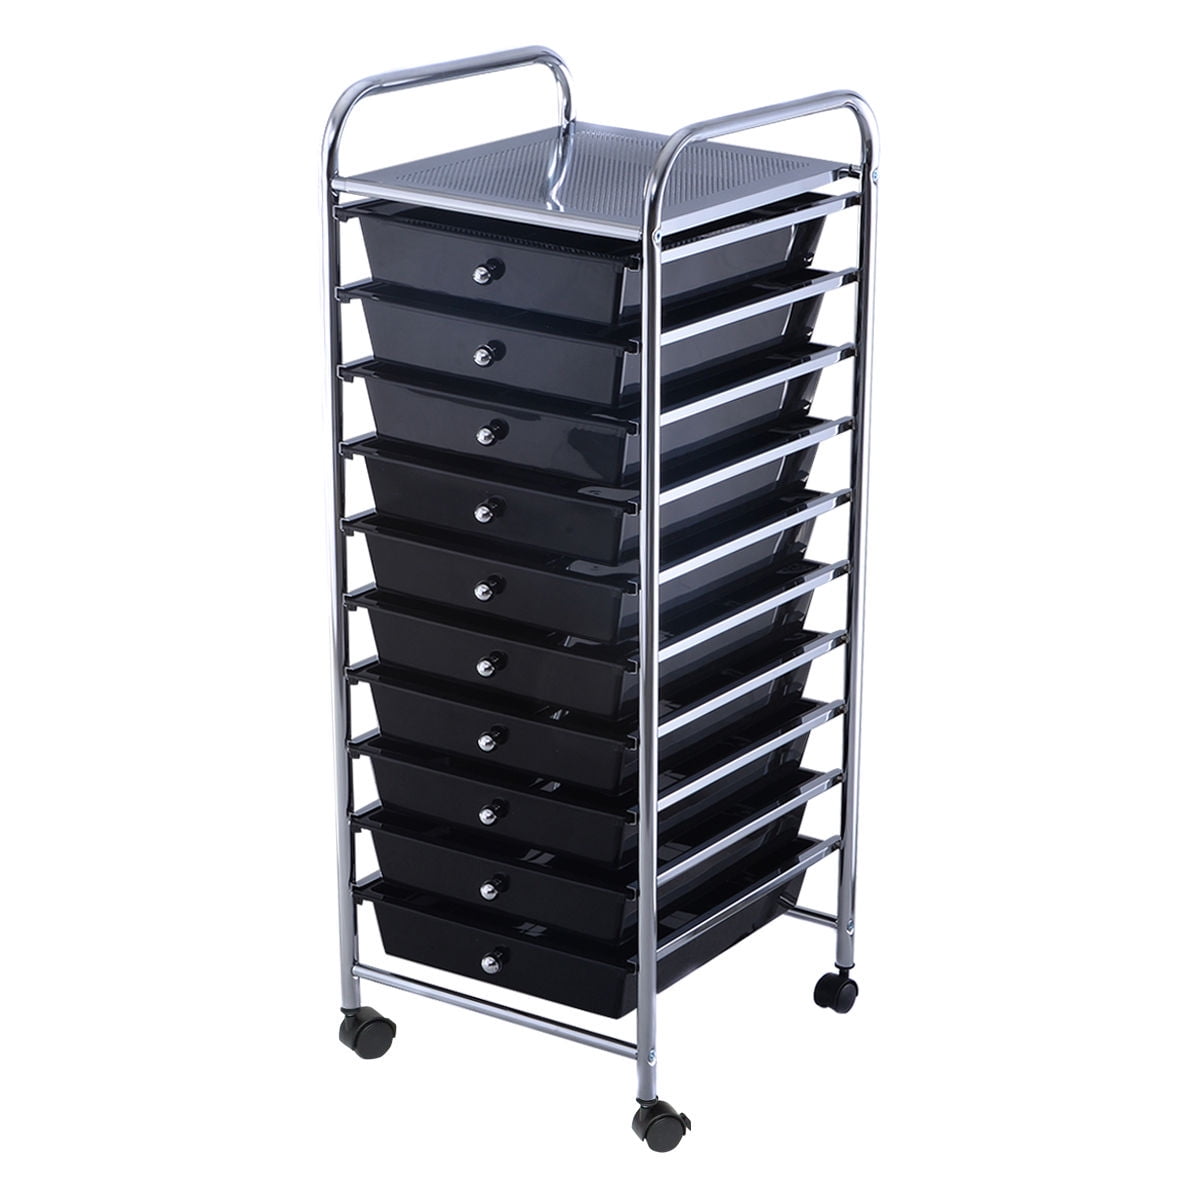 COSTWAY 10 Drawers Storage Trolley Black, 10 Drawers Home Office Stationary Rolling Cart with 4 Wheels Multipurpose Mobile Organiser Shelving Unit for Makeup Beauty Salon 